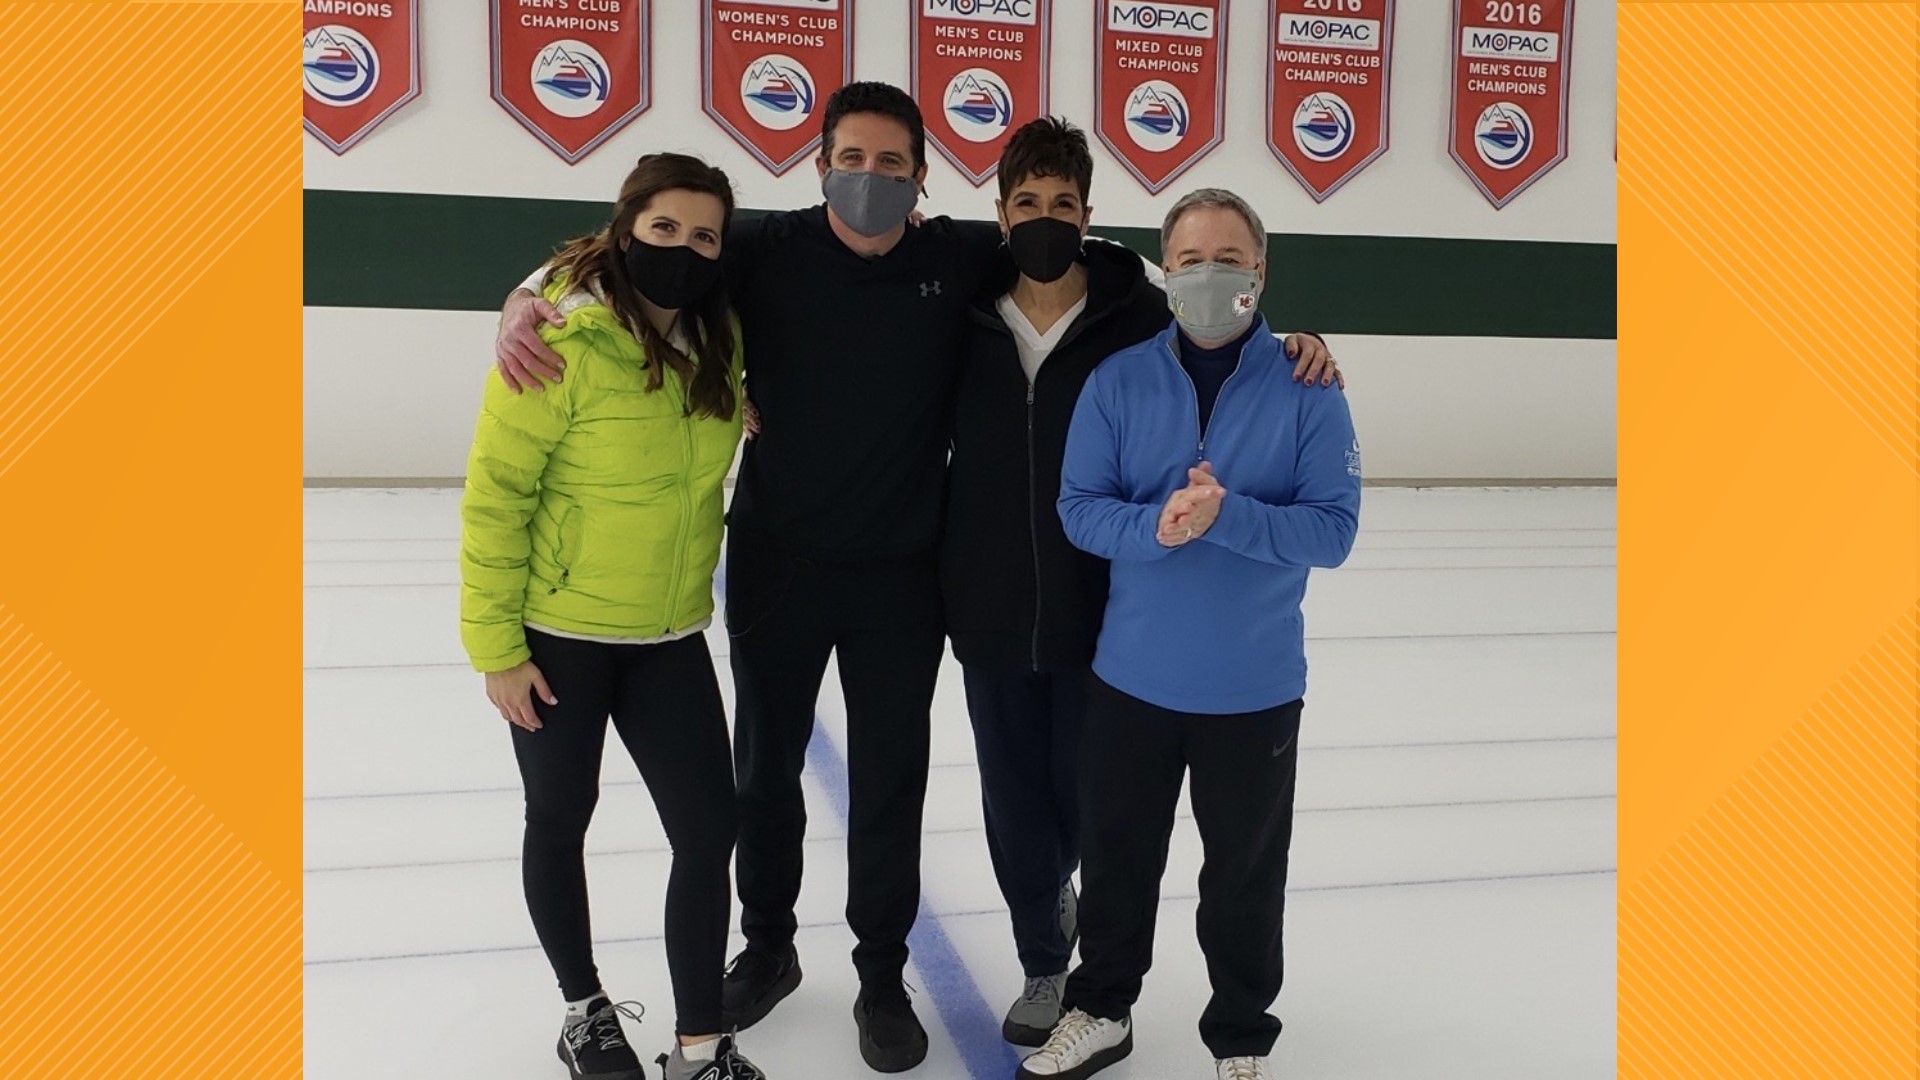 The KGW Sunrise team tried their hand at curling. They paid a visit to the Evergreen Curling Club in Beaverton.